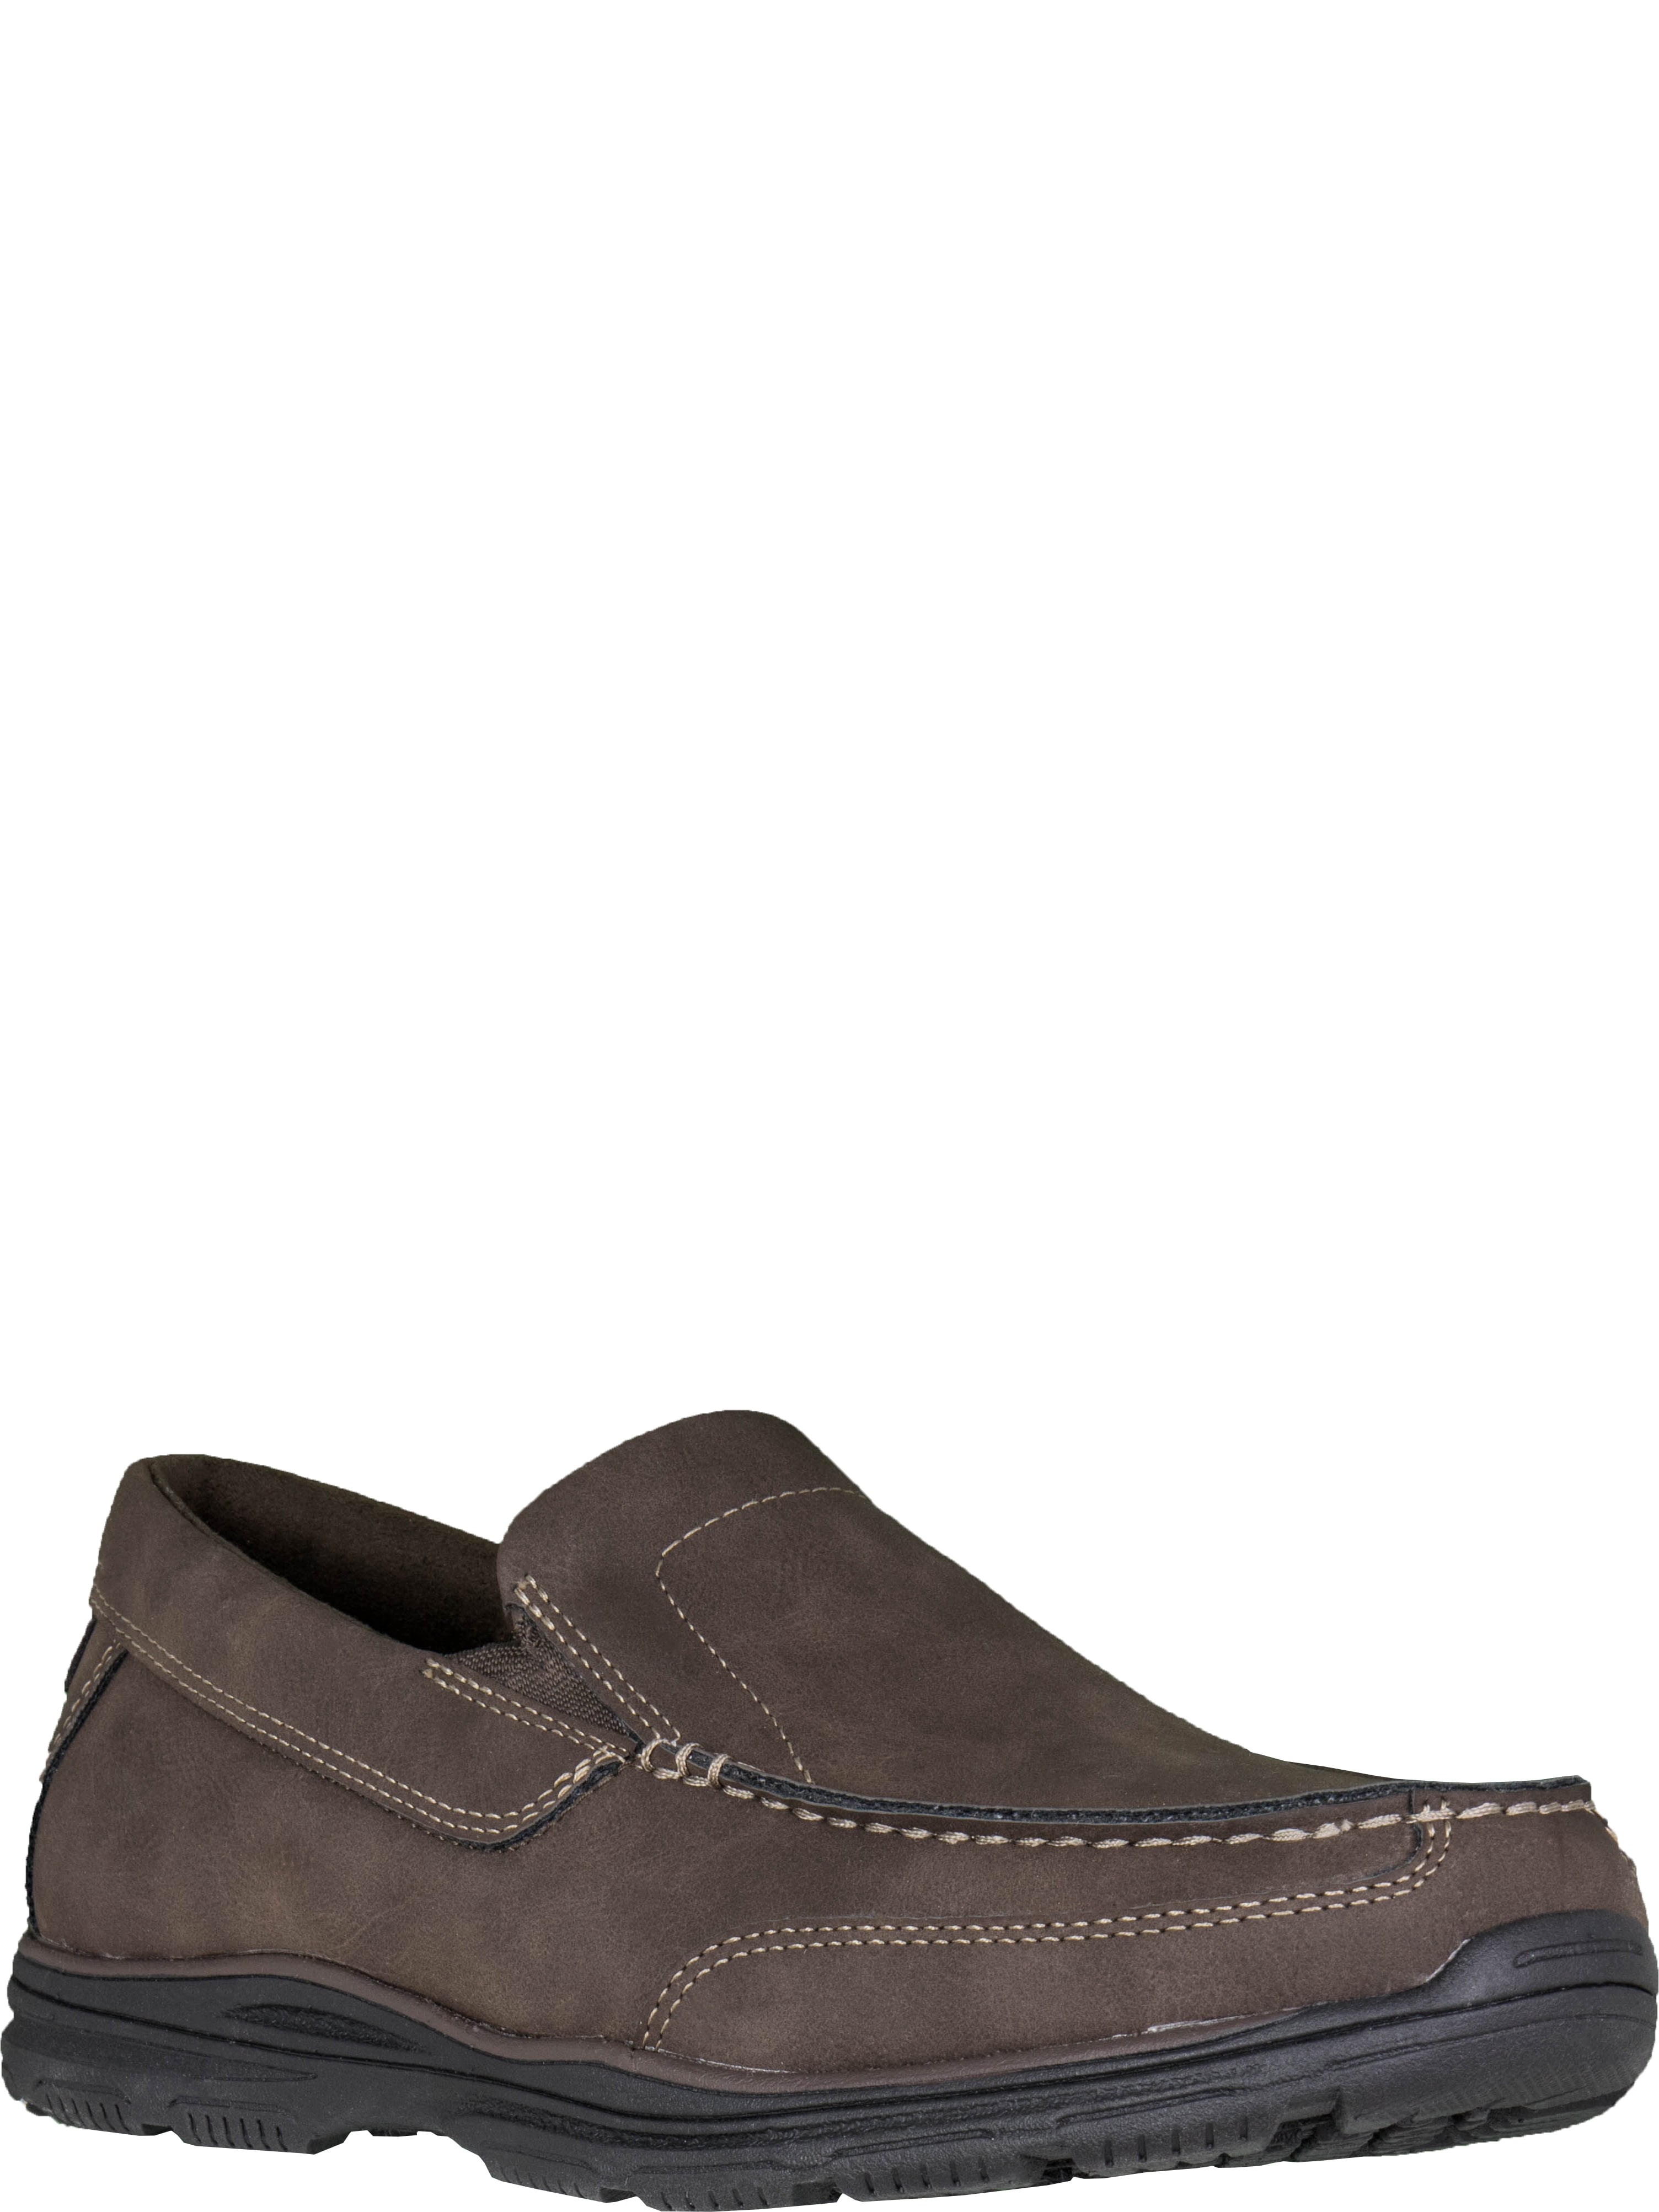 george slip on shoes